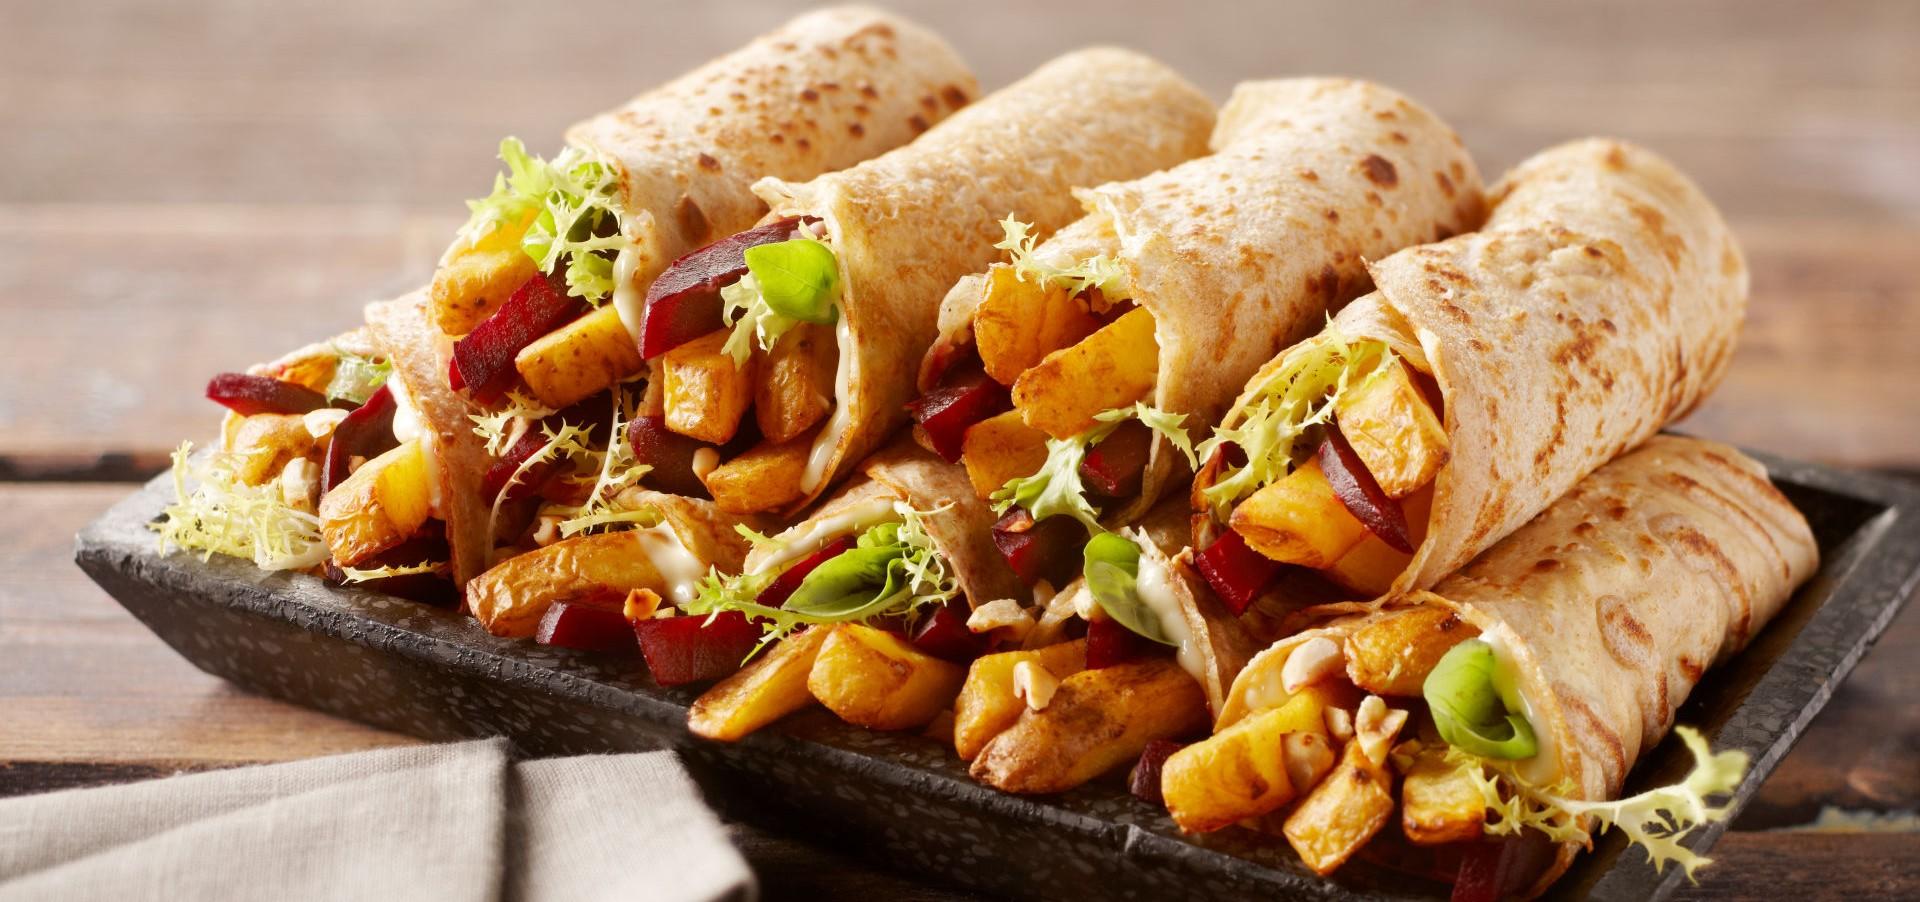 country-cooking-pure-and-rustic-fries-wraps